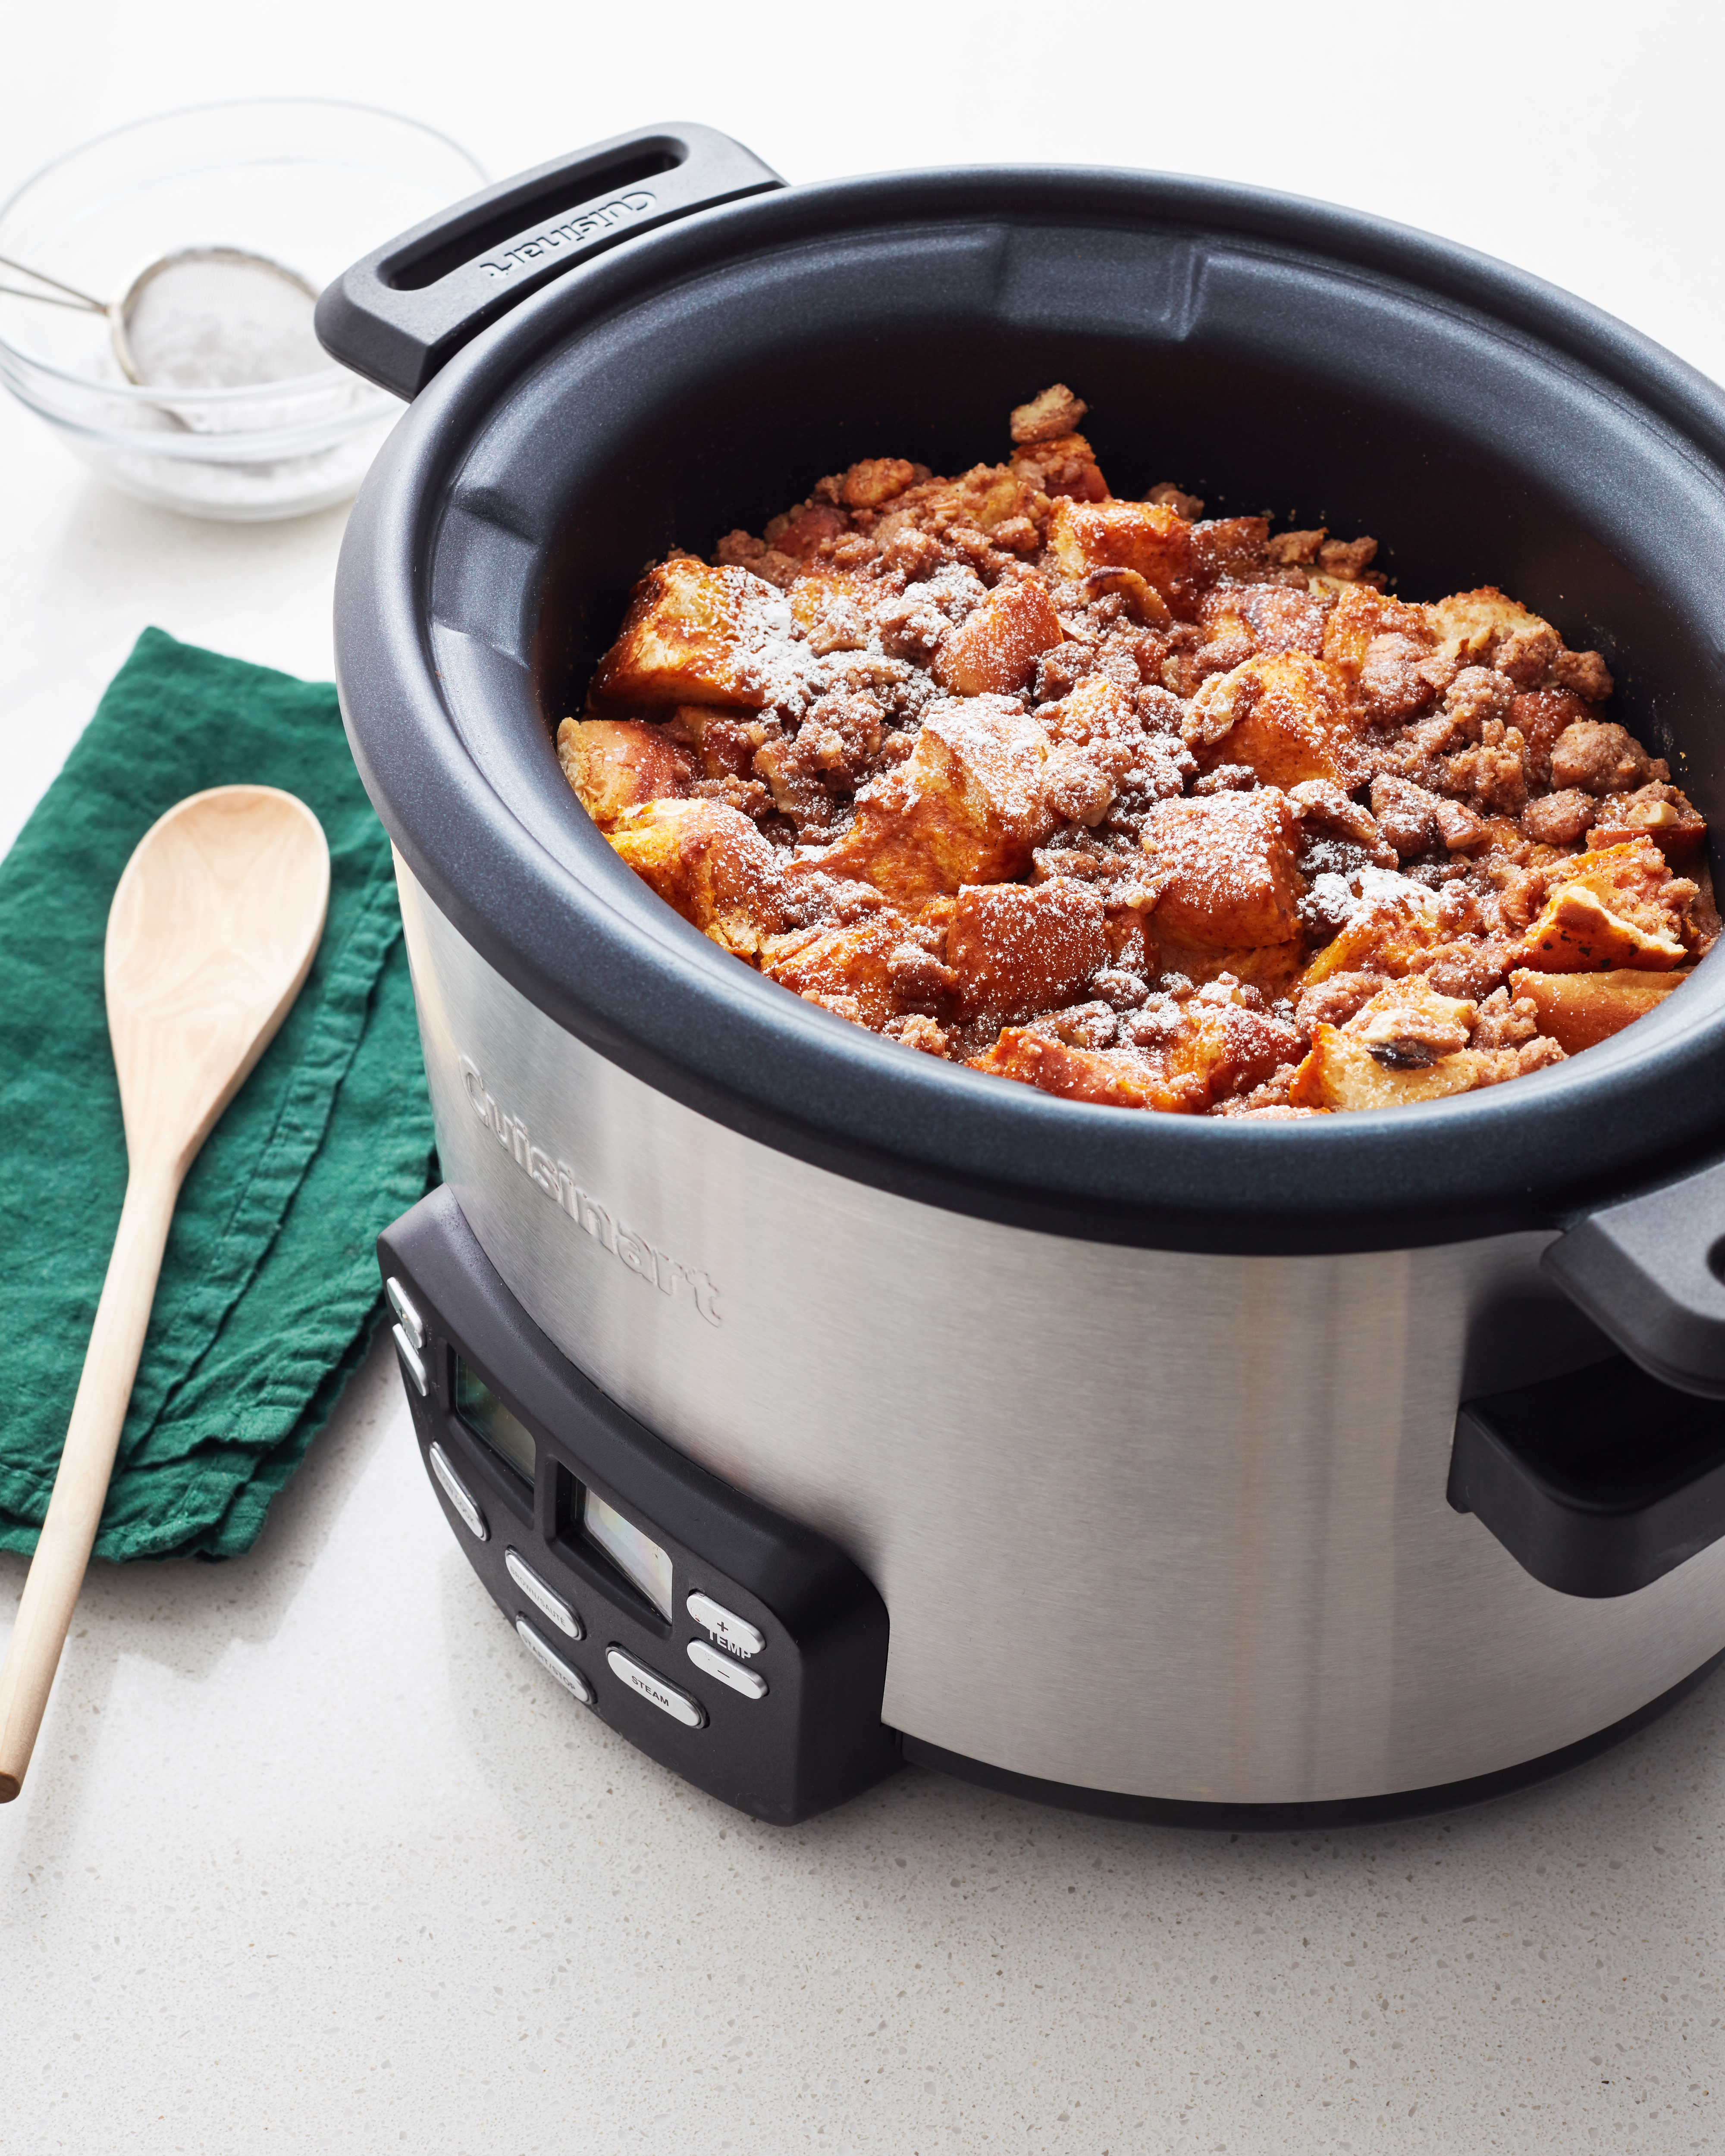 Best Crockpot Recipes - For Breakfast, Lunch, Sides, and Dinners